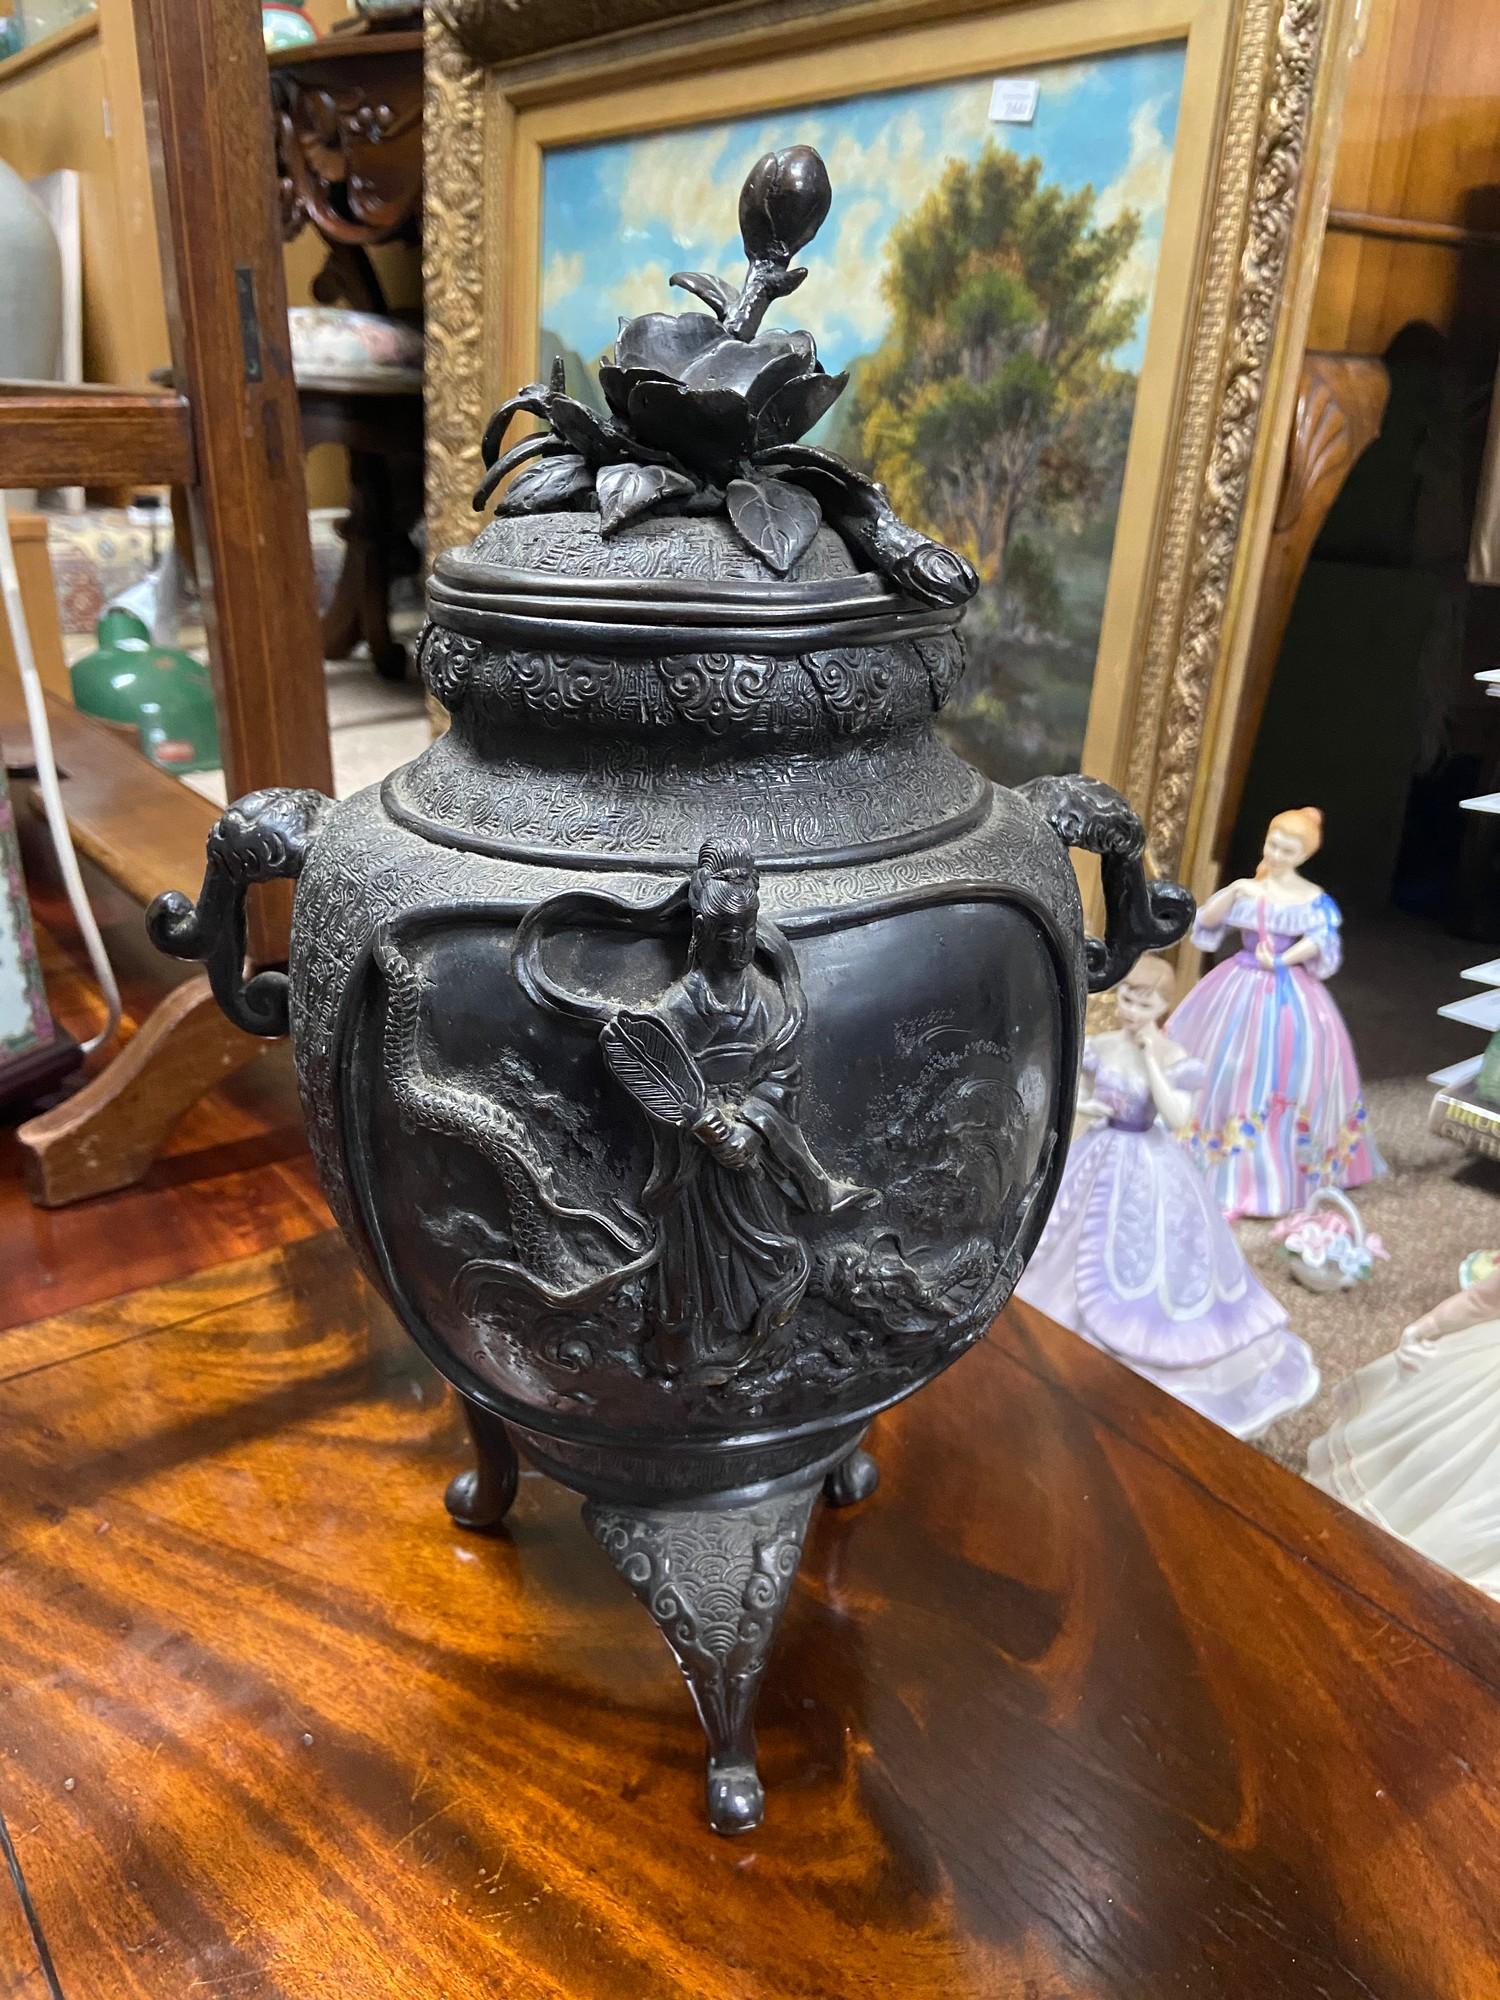 A 19th century large Chinese bronze incense burner pot, showing raised relief figures and designs.